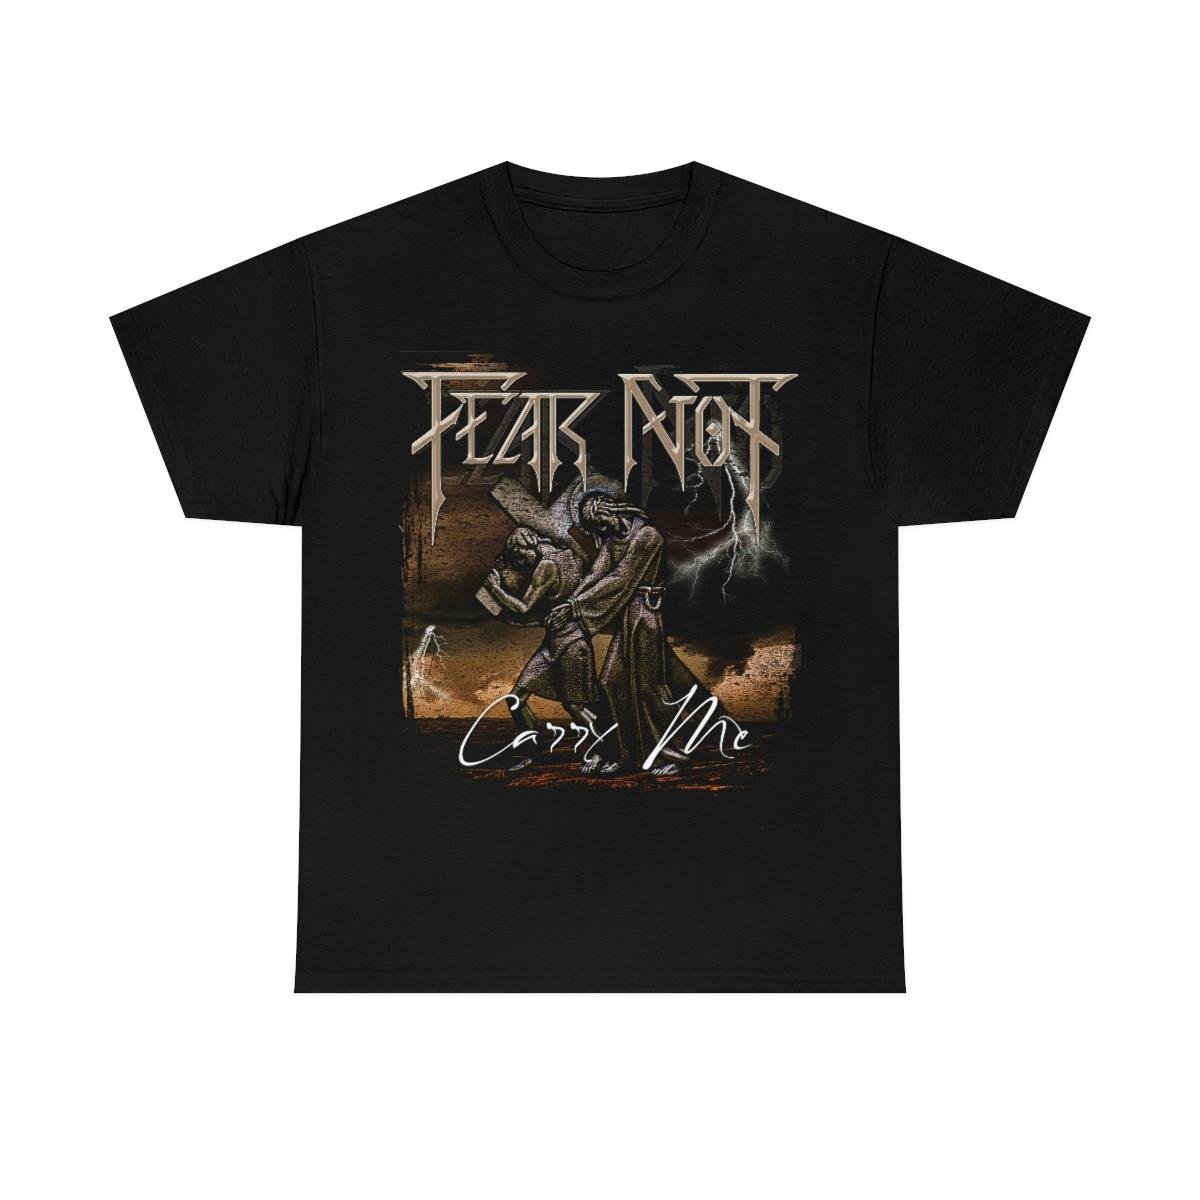 Fear Not – Carry Me Short Sleeve Tshirt (5000)